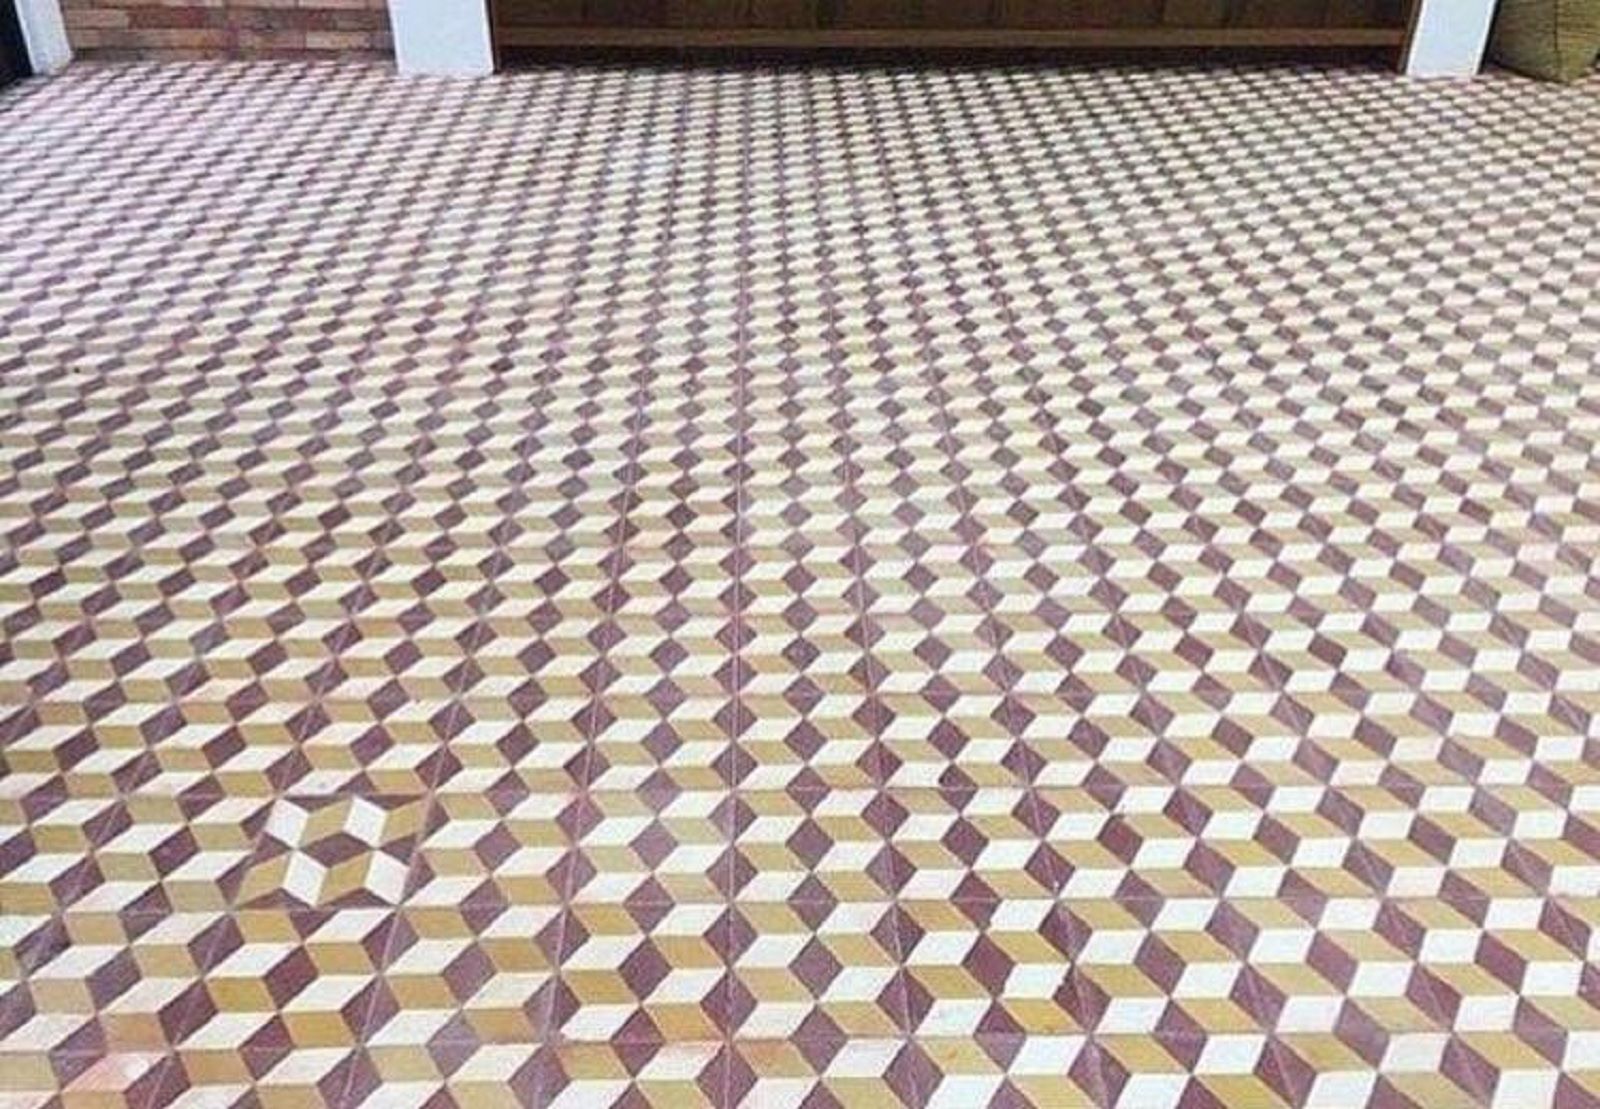 Amusing And Frustrating Design Fails From Around The World photo 41